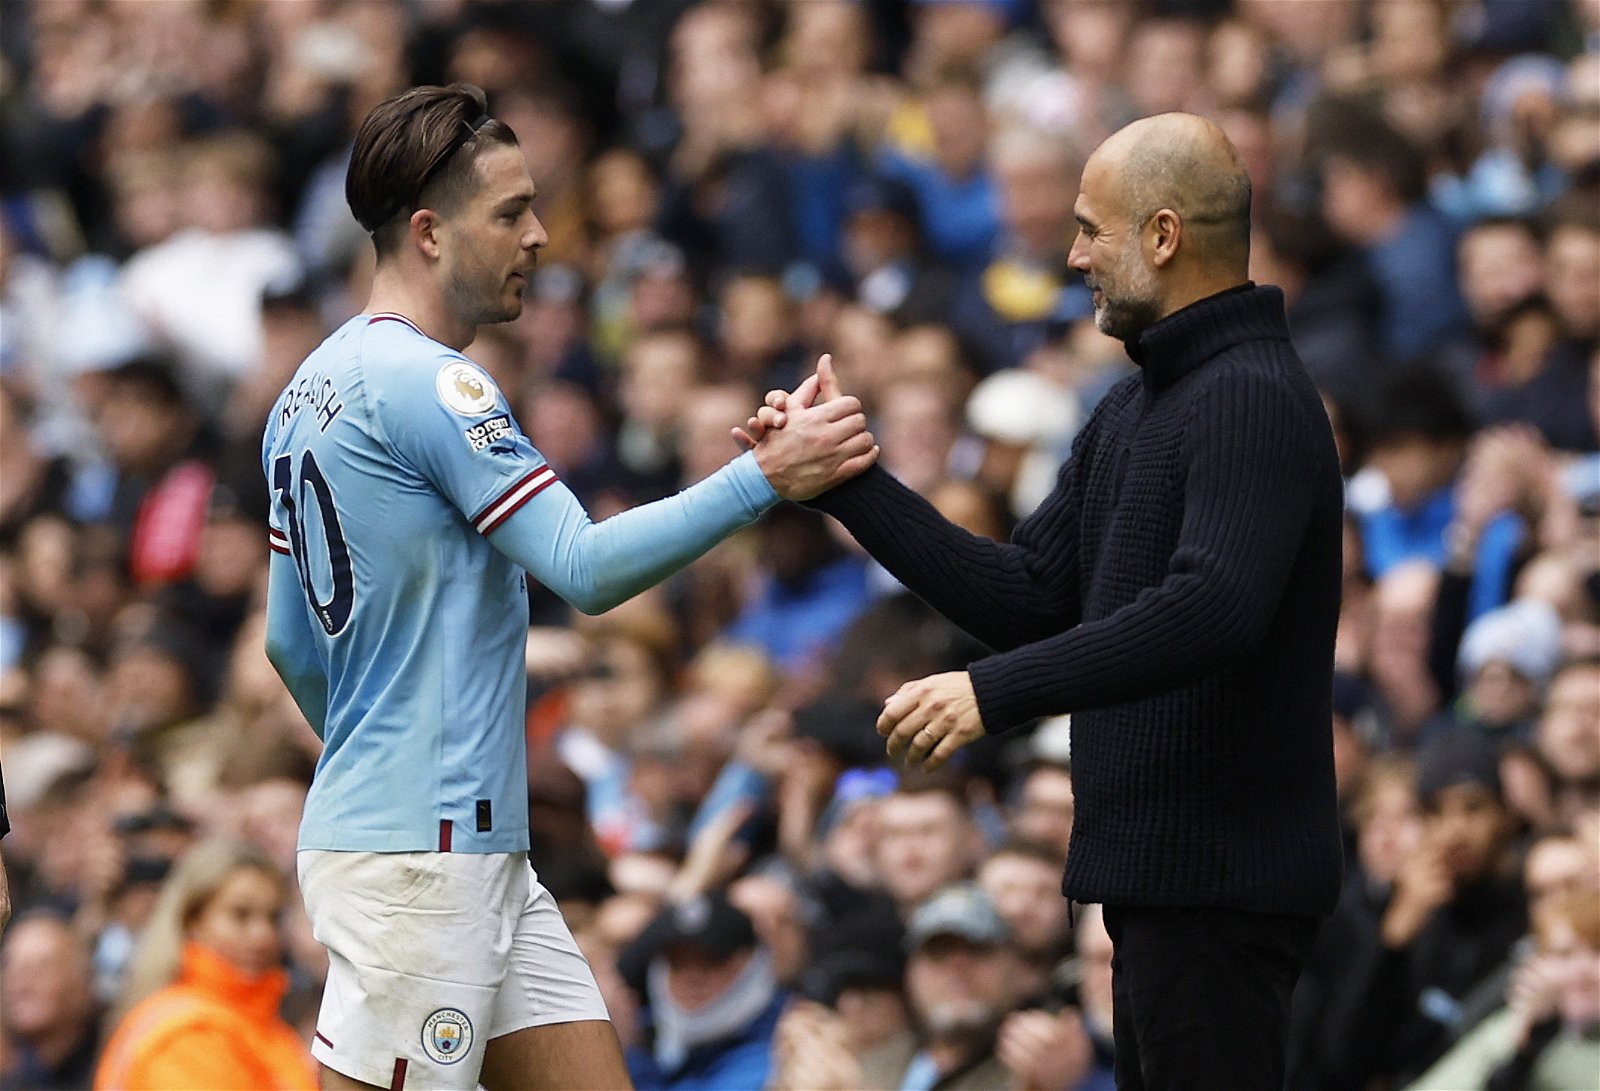 Manchester City's Jack Grealish shakes hands with manager Pep Guardiola after being substituted